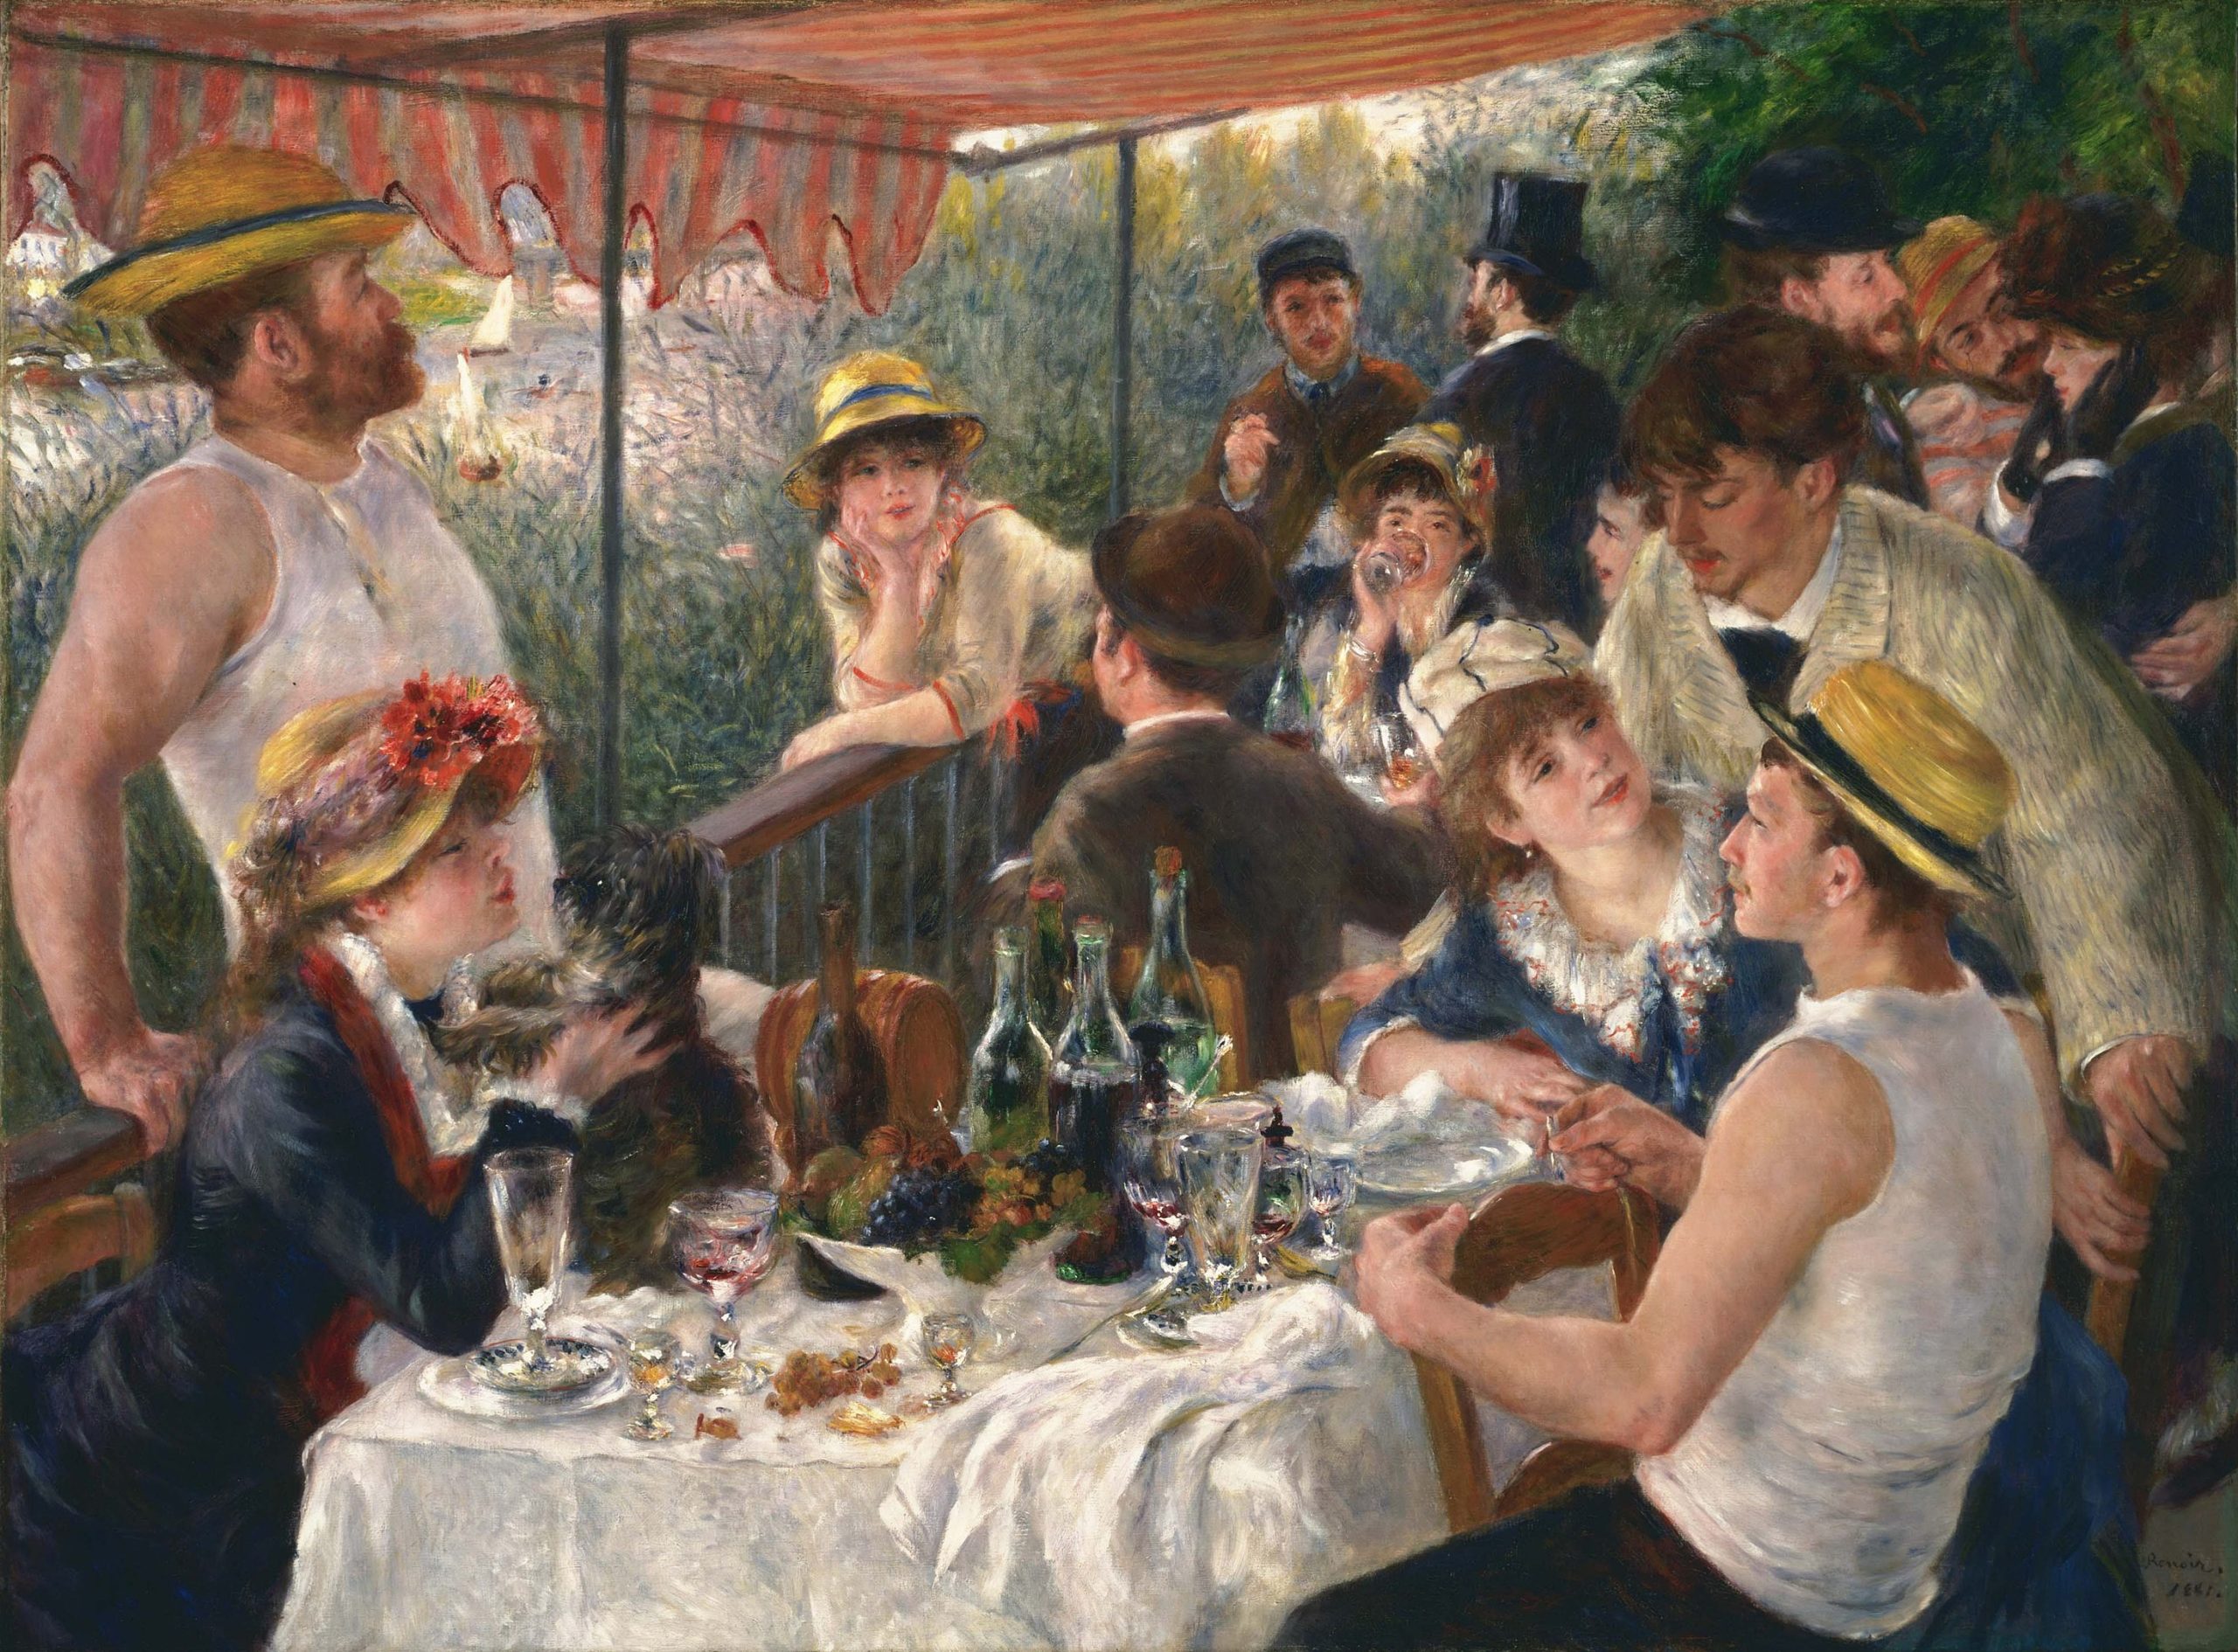 https://www.fotofocus.org/wp-content/uploads/2022/05/CAM_2926px-Pierre-Auguste_Renoir_-_Luncheon_of_the_Boating_Party_-_Google_Art_Project-scaled.jpg